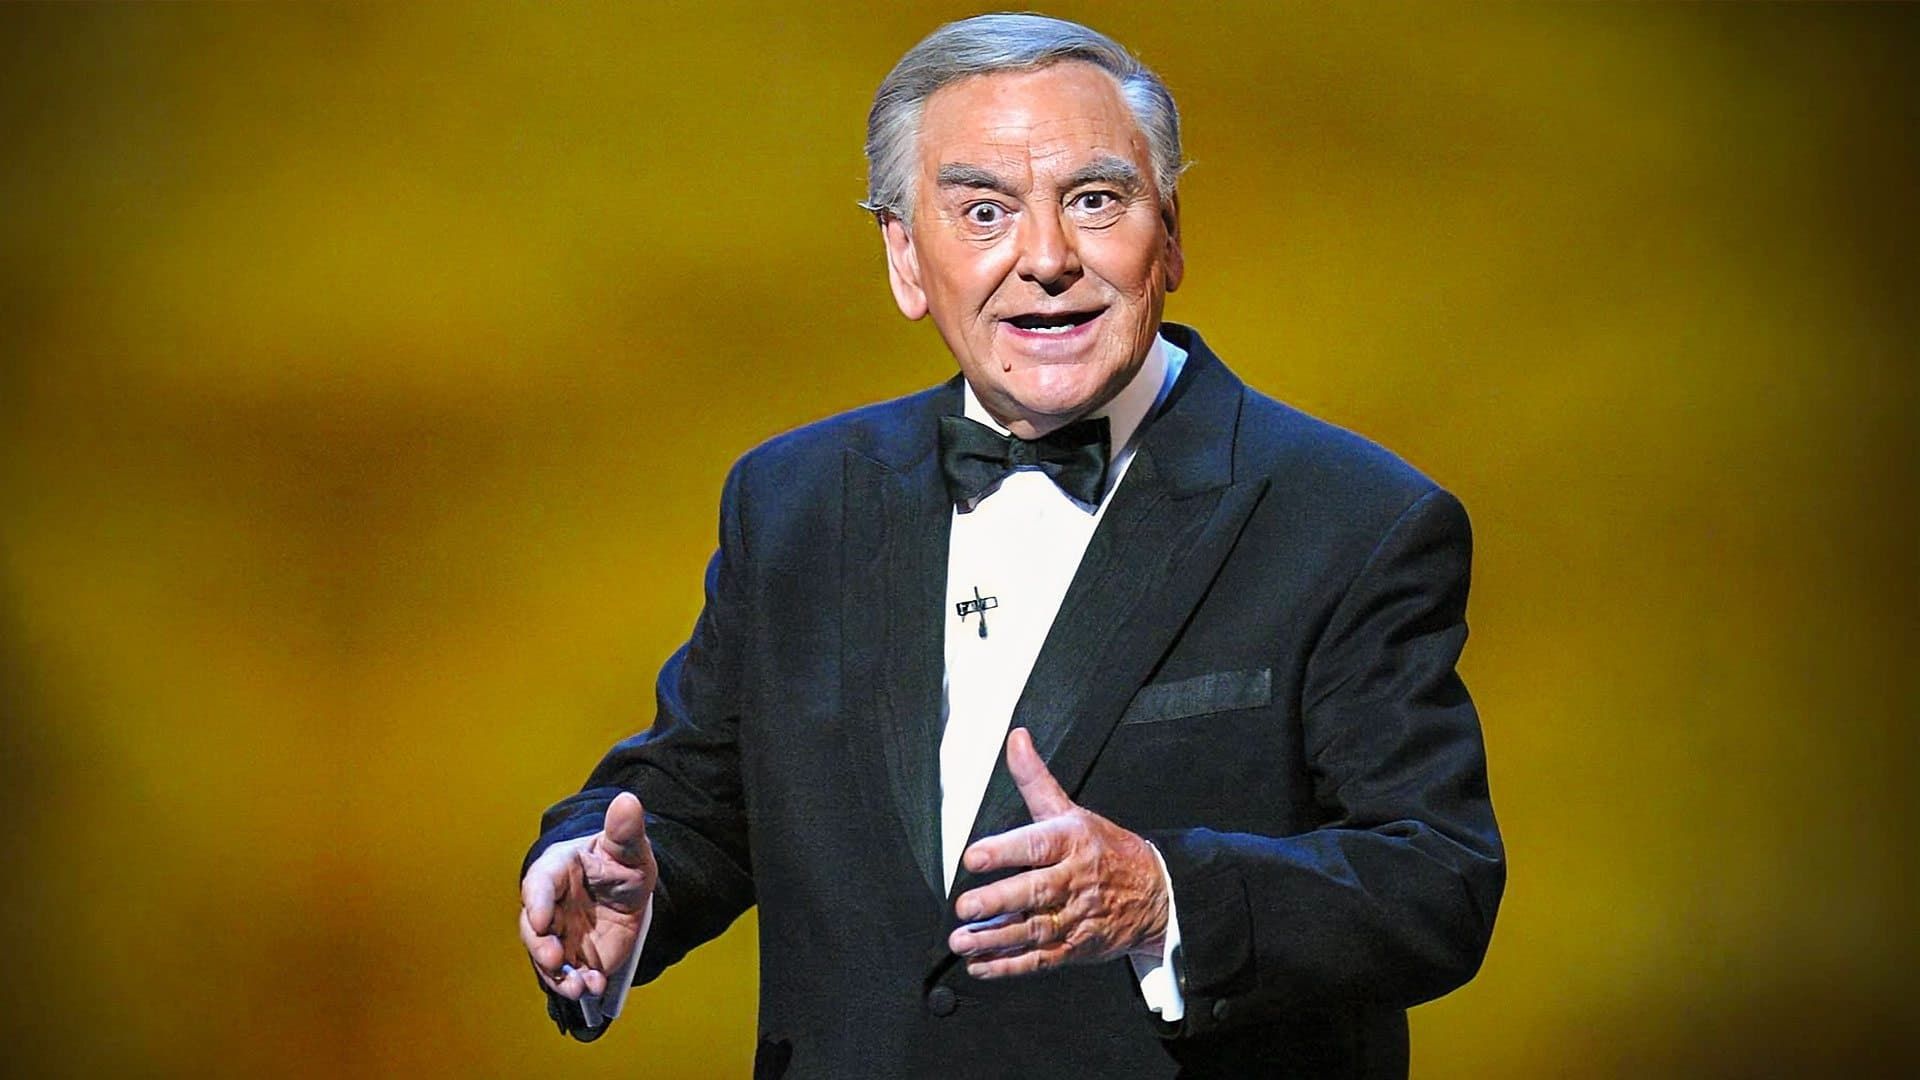 Bob Monkhouse: The Last Stand background